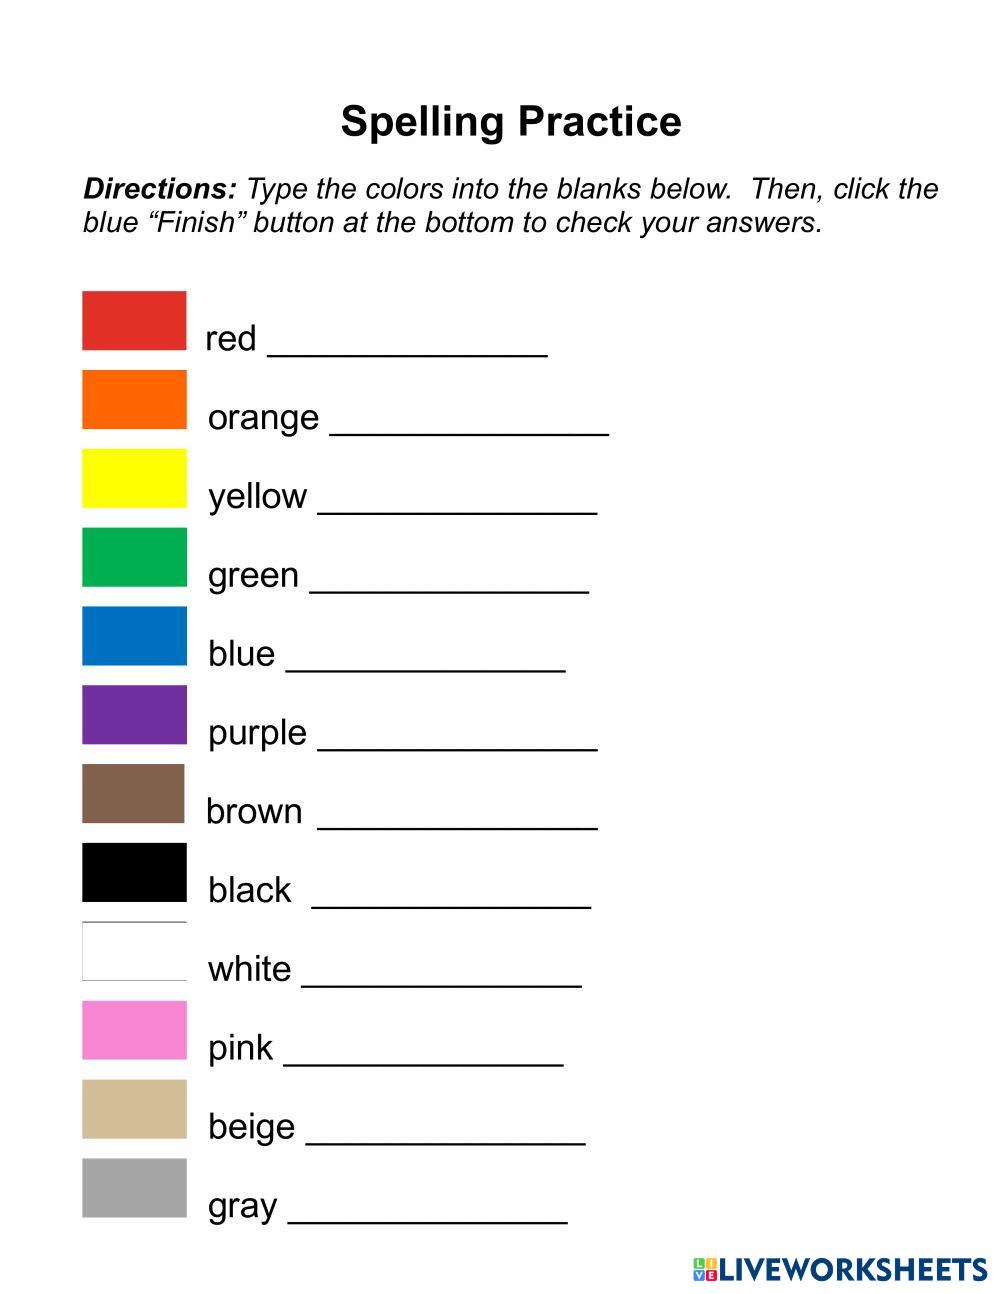 Spelling Practice with Colors | Live Worksheets